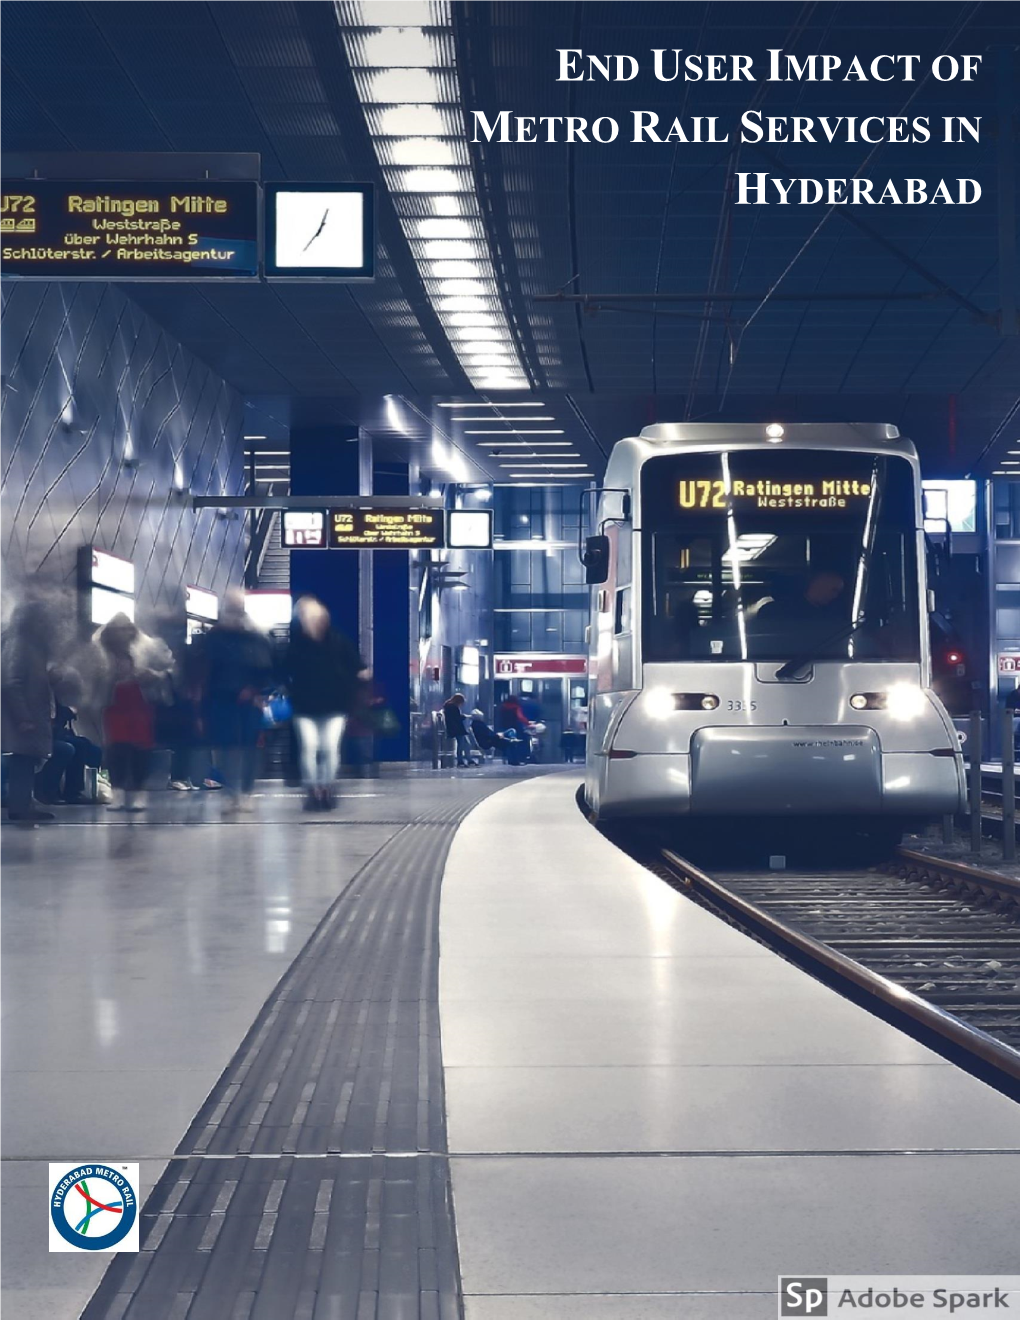 End User Impact of Metro Rail Services in Hyderabad